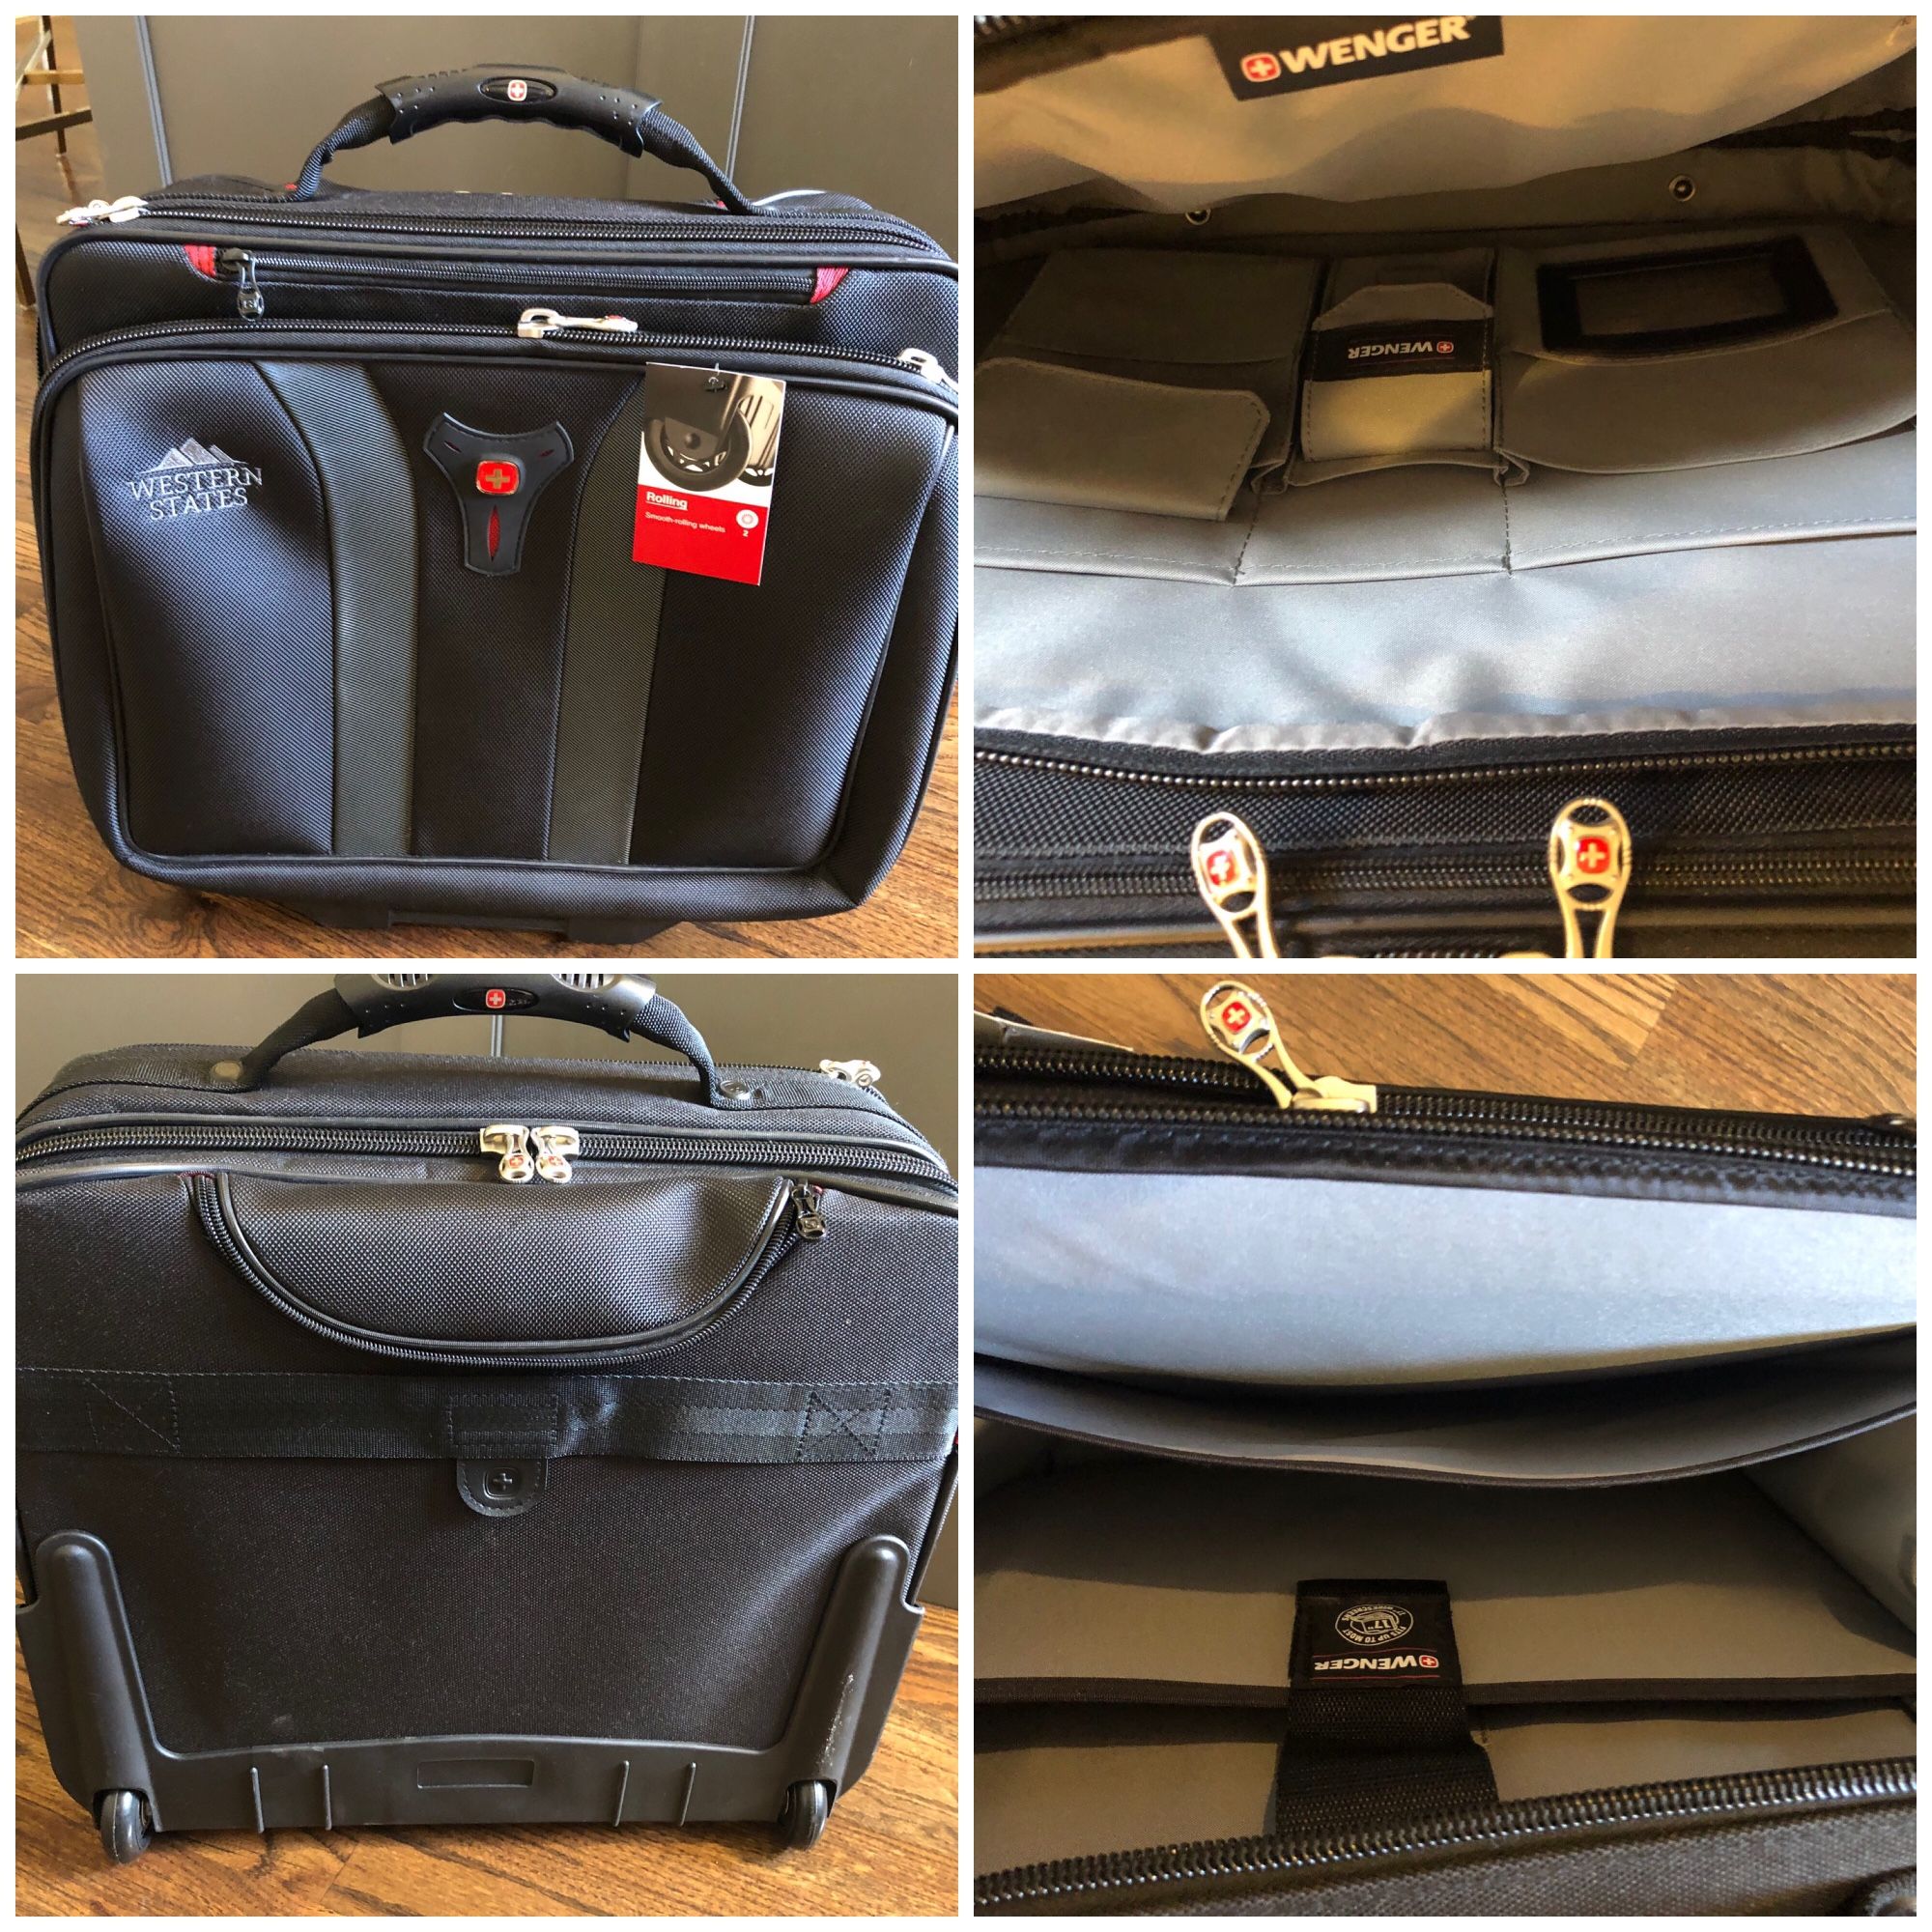 Brand new rolling carry-on briefcase/suitcase. The measurements are: 18 in wide, 16 in tall (not including handle), 8 in deep. Venmo to hold located i